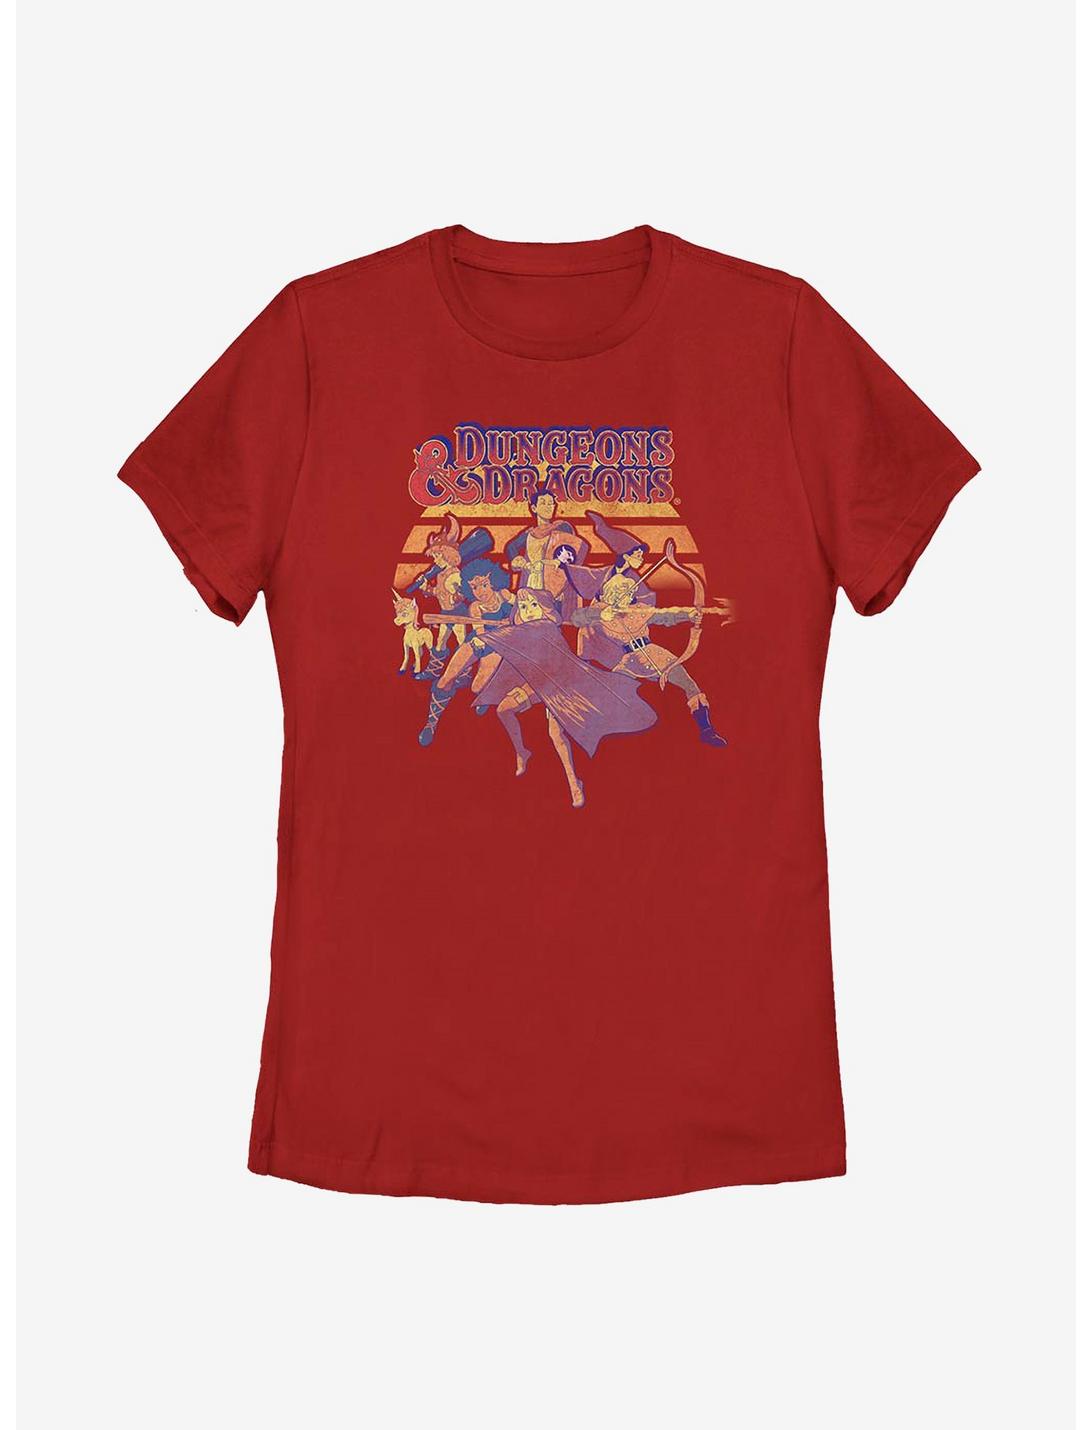 Dungeons & Dragons Retro Womens T-Shirt, RED, hi-res